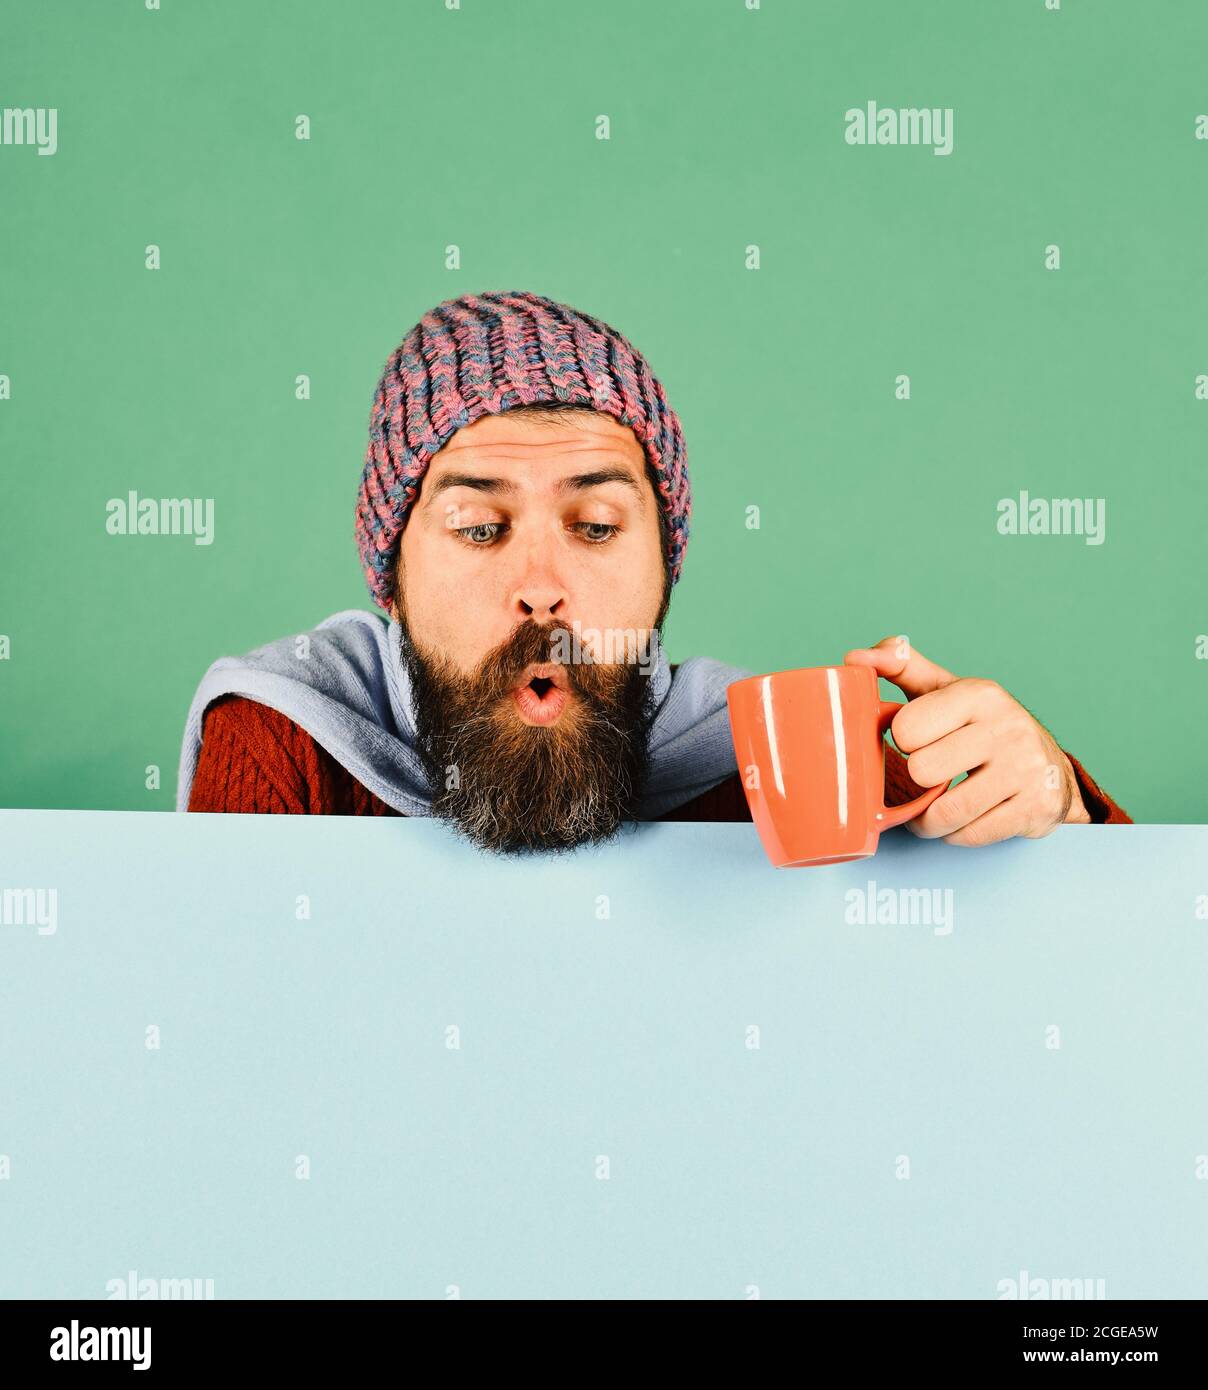 https://c8.alamy.com/comp/2CGEA5W/english-tea-and-autumn-concept-guy-with-surprised-face-looks-down-wearing-warm-hat-on-green-and-cyan-background-copy-space-fall-season-and-hot-beverage-time-man-with-beard-holds-orange-tea-cup-2CGEA5W.jpg